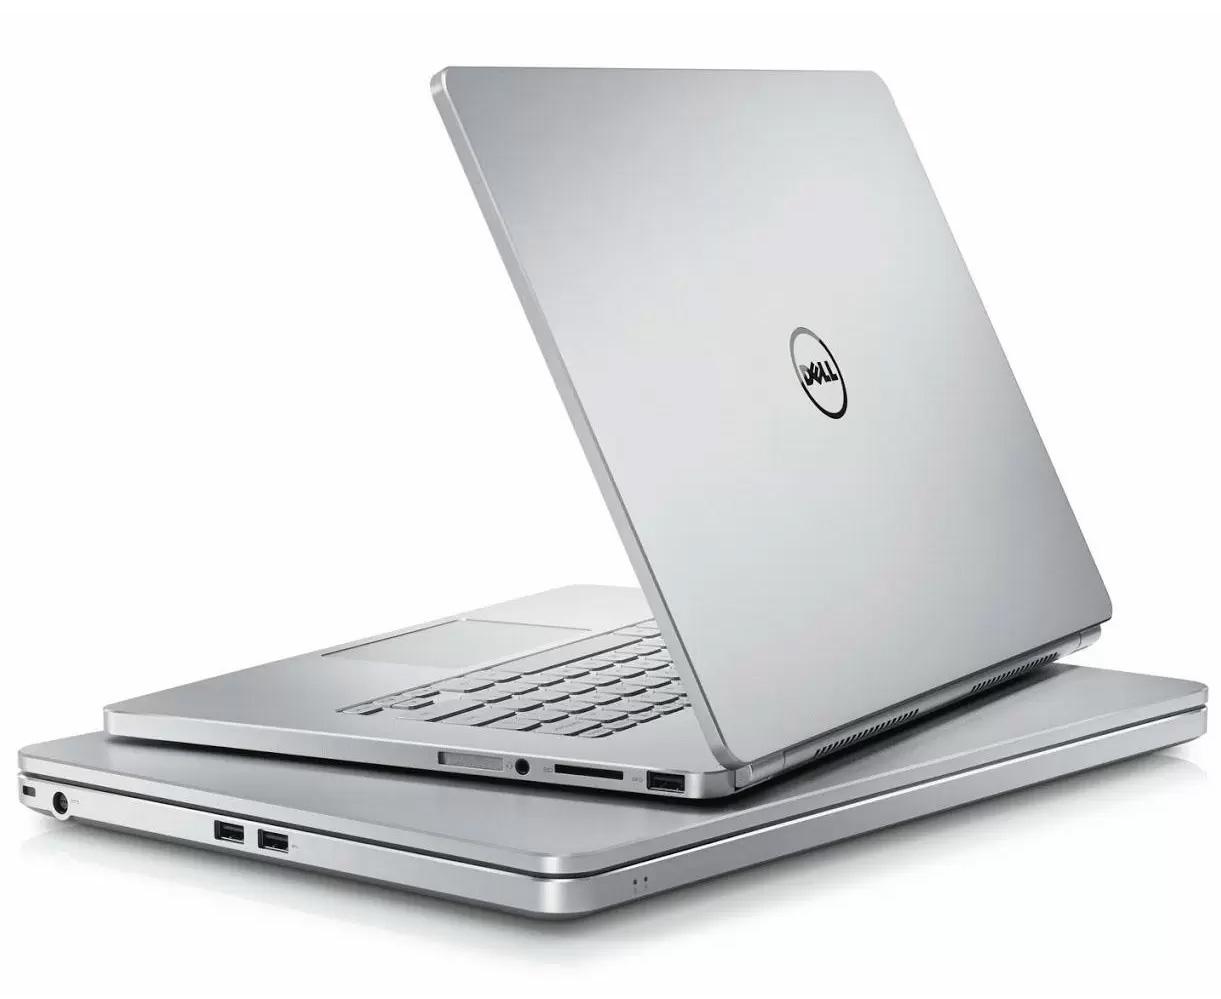 Dell Inspiron 14 7000 AMD Ryzen 7 16GB Notebook Laptop Notebook for $799.99 Shipped